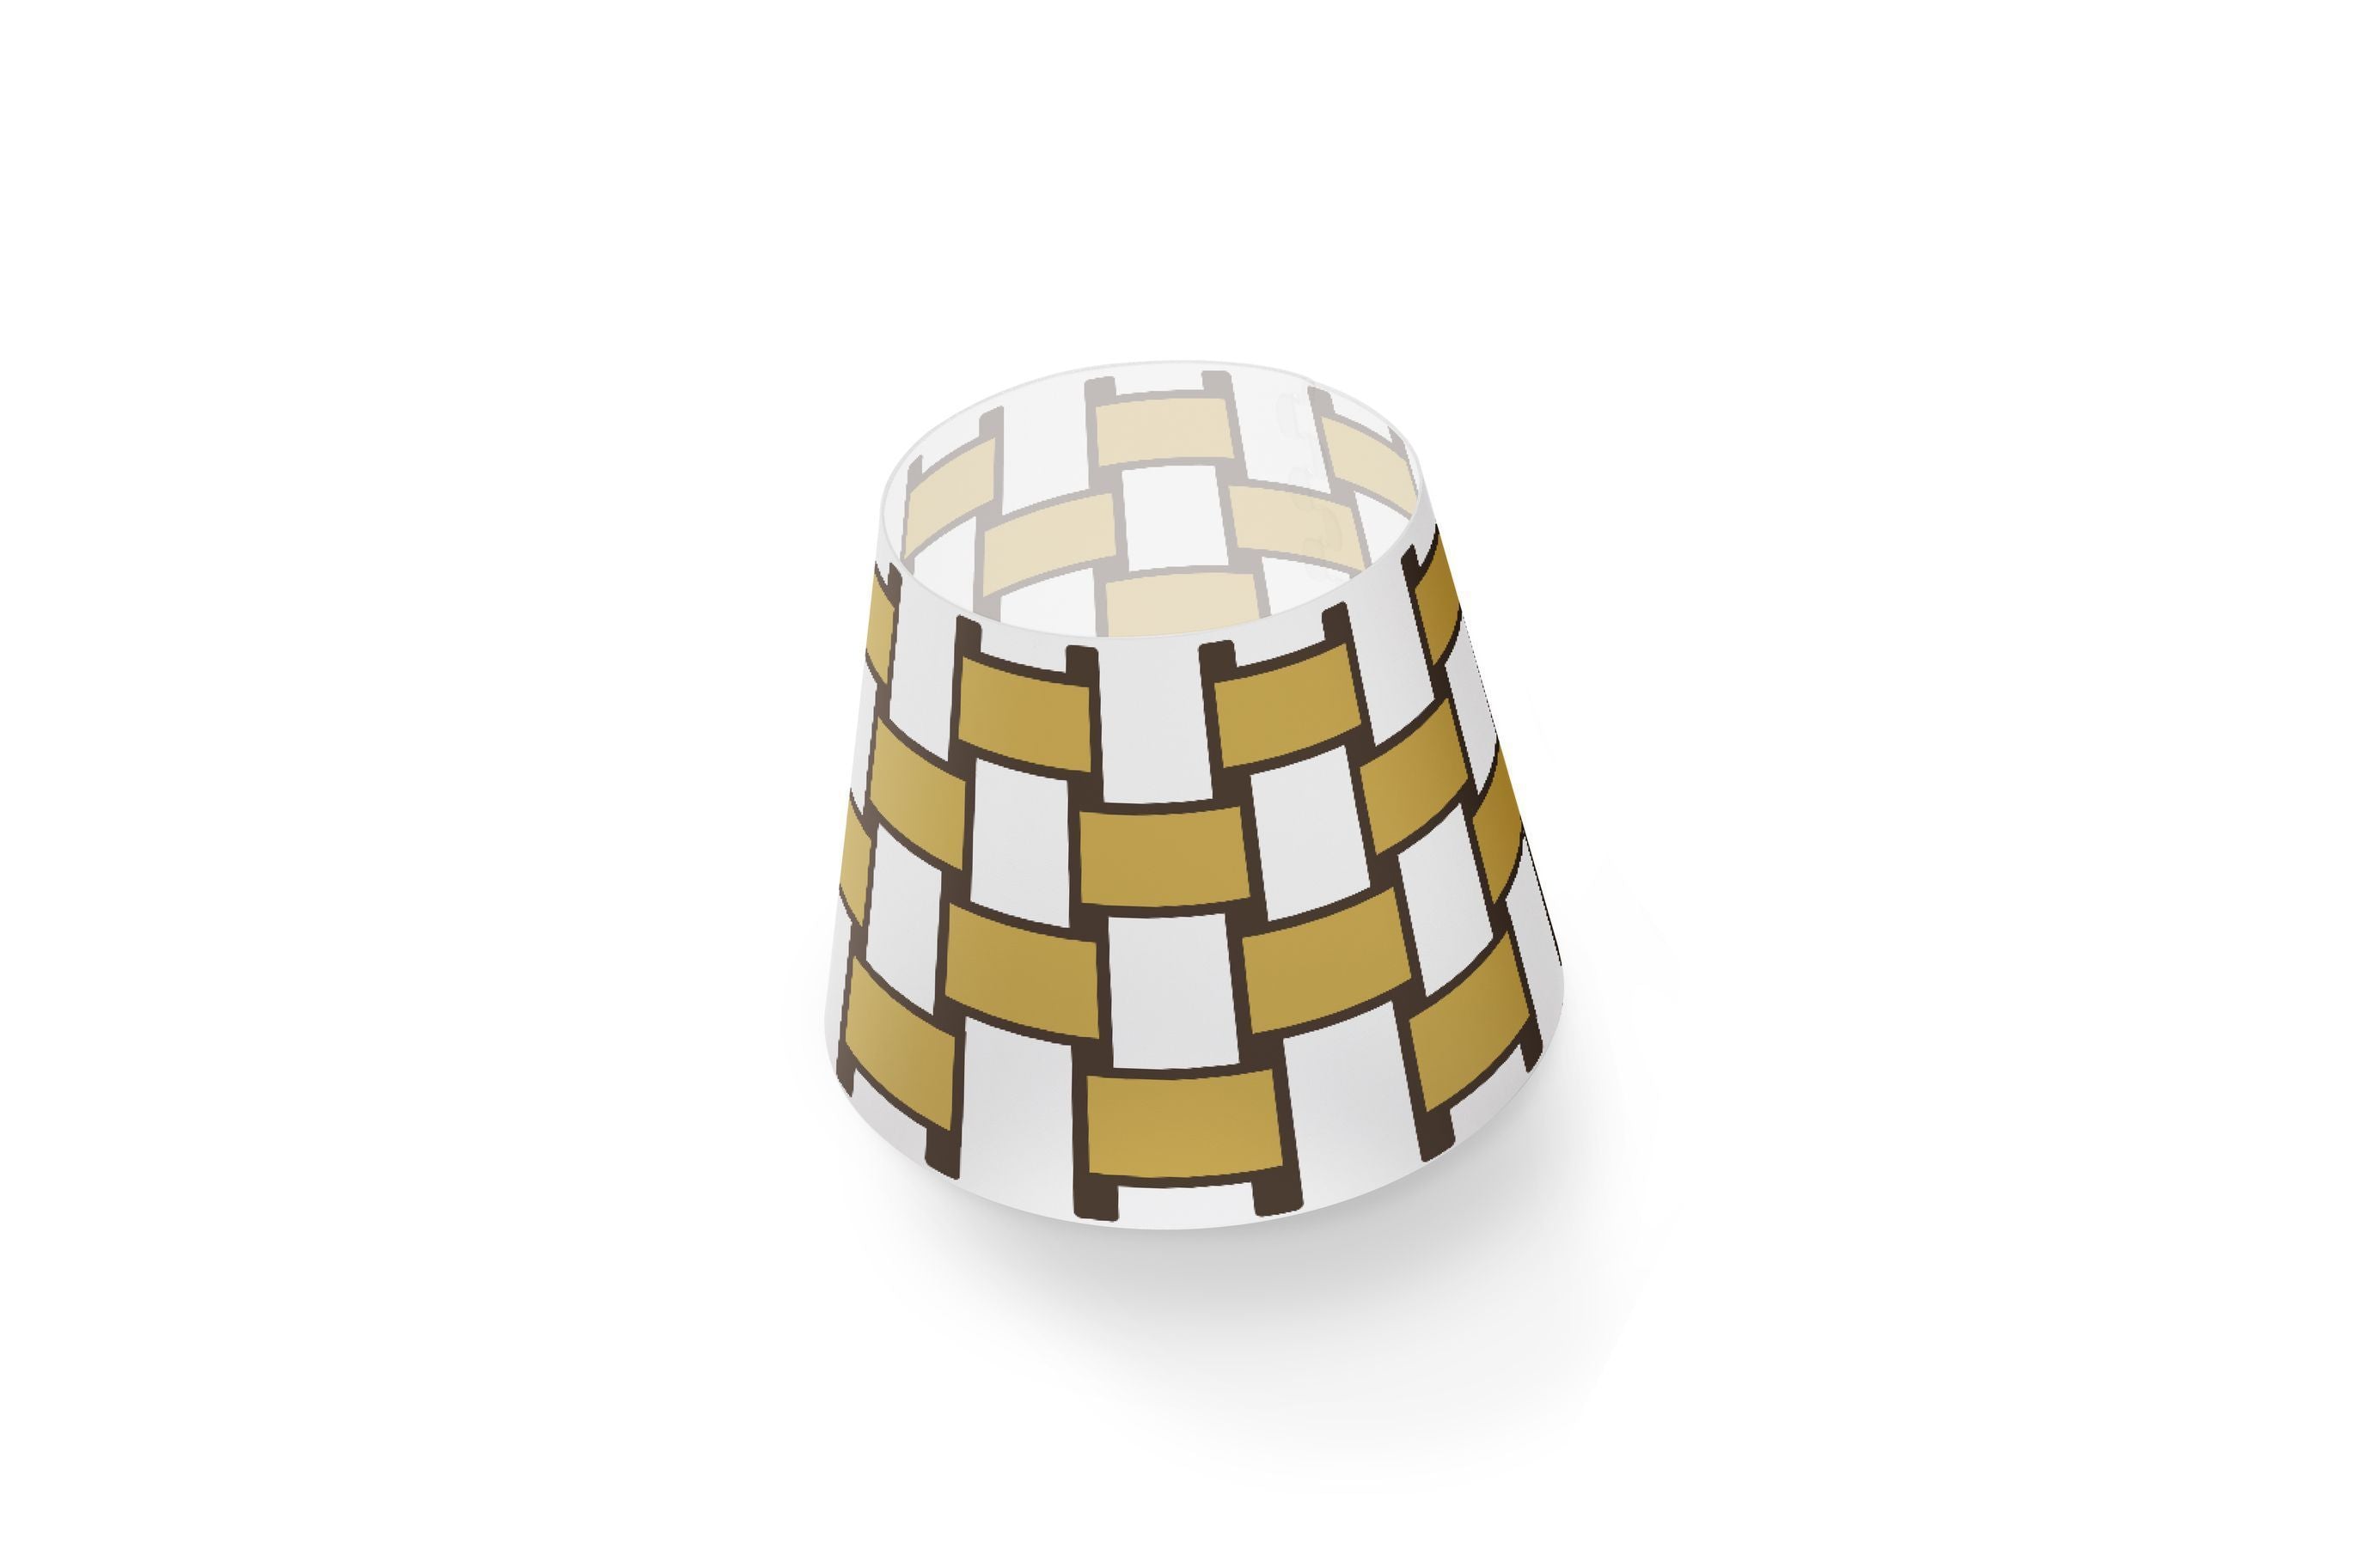 Fatboy Cooper Cappie Lampshade Basket Weave, Gold Honey